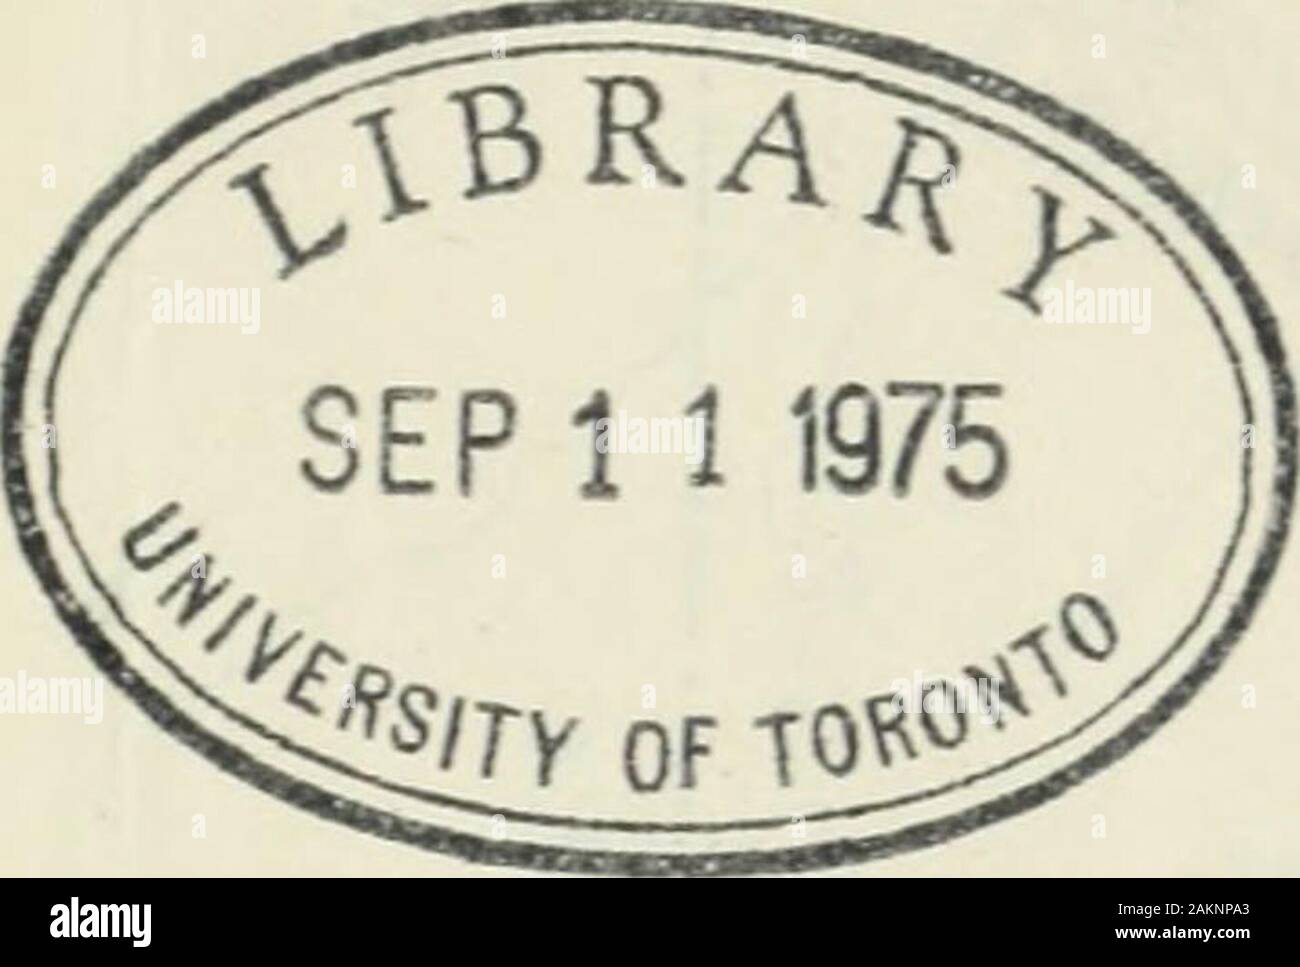 Ontario Sessional Papers, 1901, No.45-79 . 10 12 M. McGregor 81 00 Jas. Bjrtnn 51 75 F. Crozier 38 70 Jno. Richards 56 25 Wm. Fisher 59 6 ! S. S. Ritchie 78 00 H. McQuarrie 60 75 Jno. Gulls 92 25 Jno. Newton 78 75 E. Monaghan 76 fO M. J. Sheedy 108 00 P. T. Lawlor 75 37 P. Gannon 77 61 Wm. Judge 76 50 R. Doughty 98 11 S Trevaille 110 25 R. Herron 28 12 S. McChesney 51 18 G. M. Sharpe 63 00 H. Pelletier 34 00 Jno. Taylor 81 OO A. H. Hagen 33 75 0. CoUver 24 75 Ed. Parr 182 50 A. McLellan 70 88 M. McGregor 100 00 W. Goldthorpe ^ 51 12 E. Beauchaine 36 00 N. Tallman 38 25 Jno. Bailey 12 00 A. R. Stock Photo